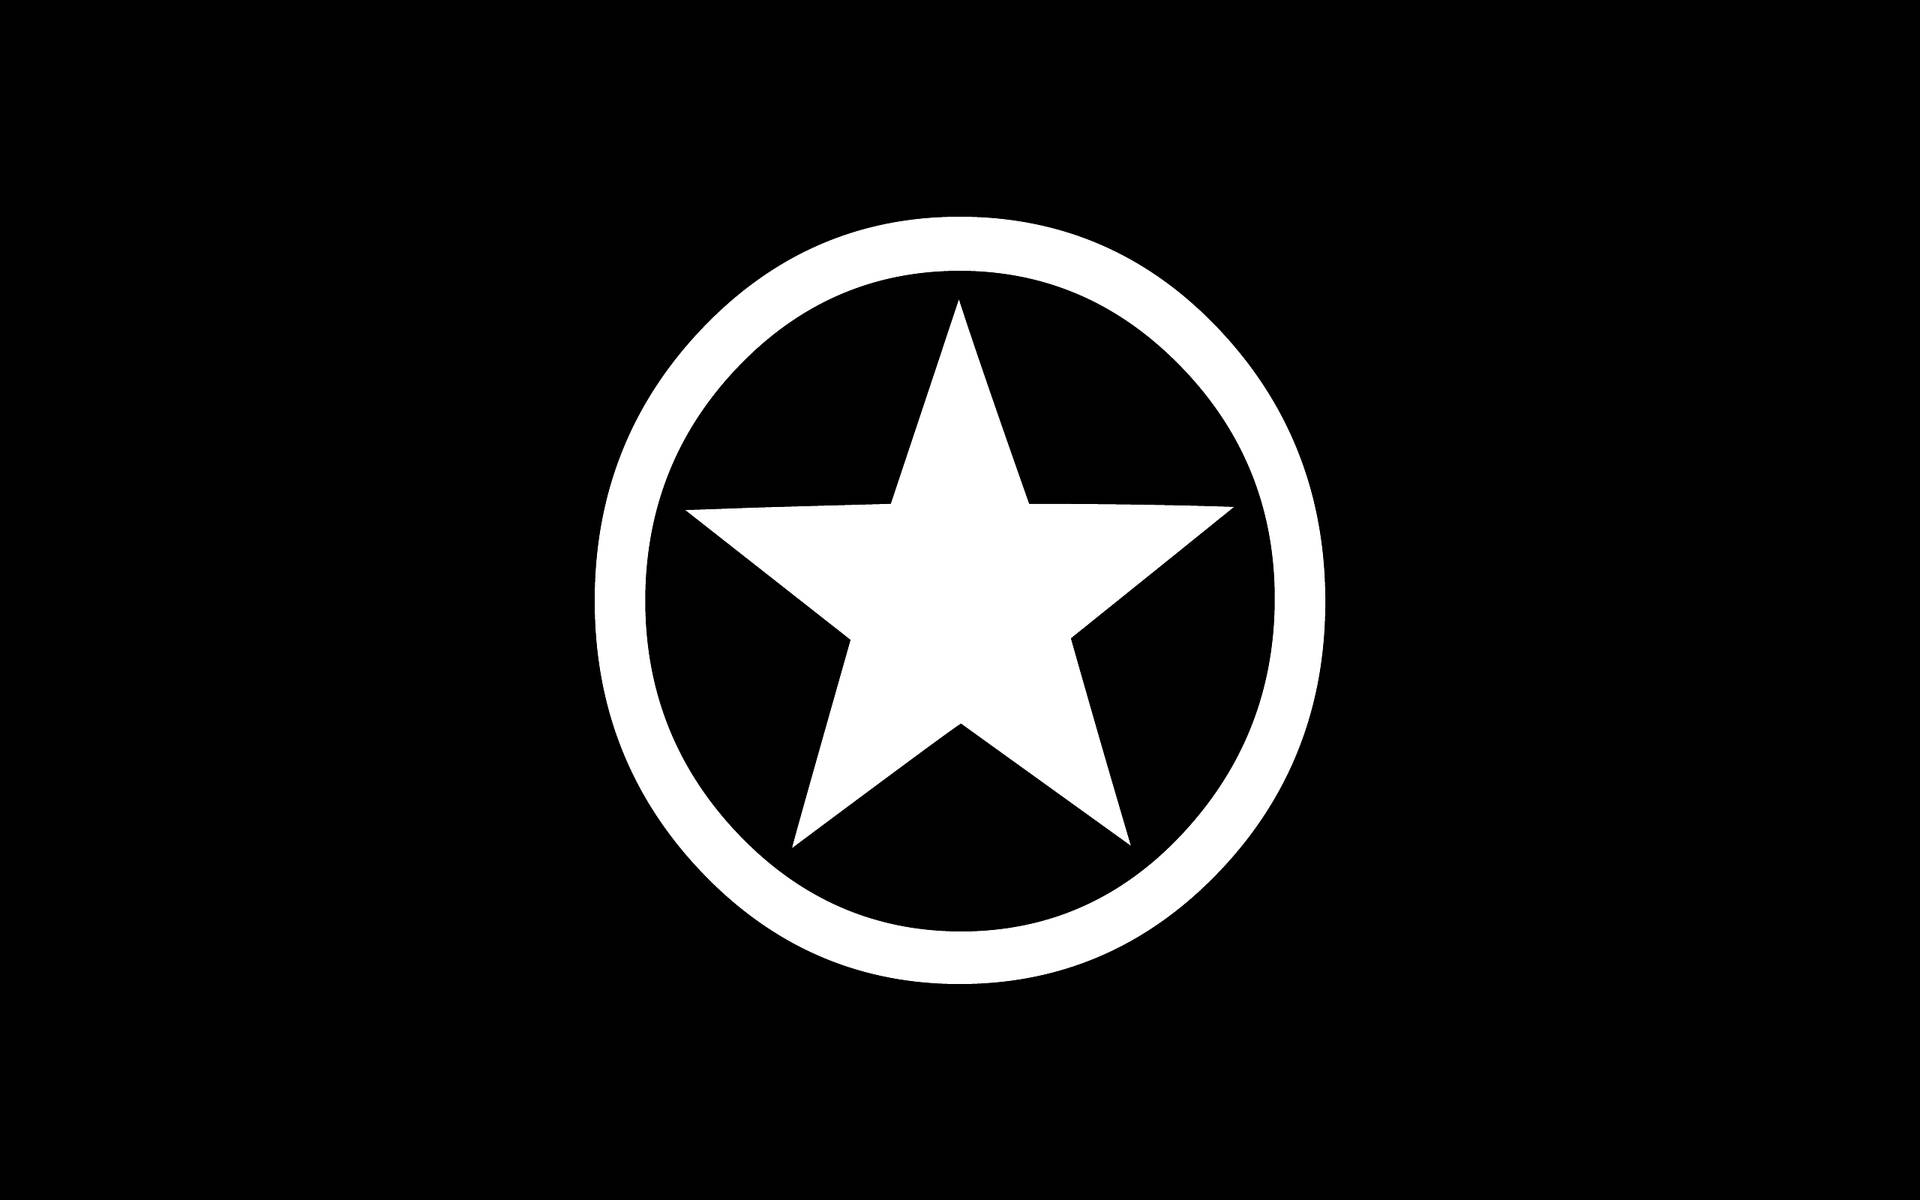 Classic Converse Logo with Iconic Star Wallpaper